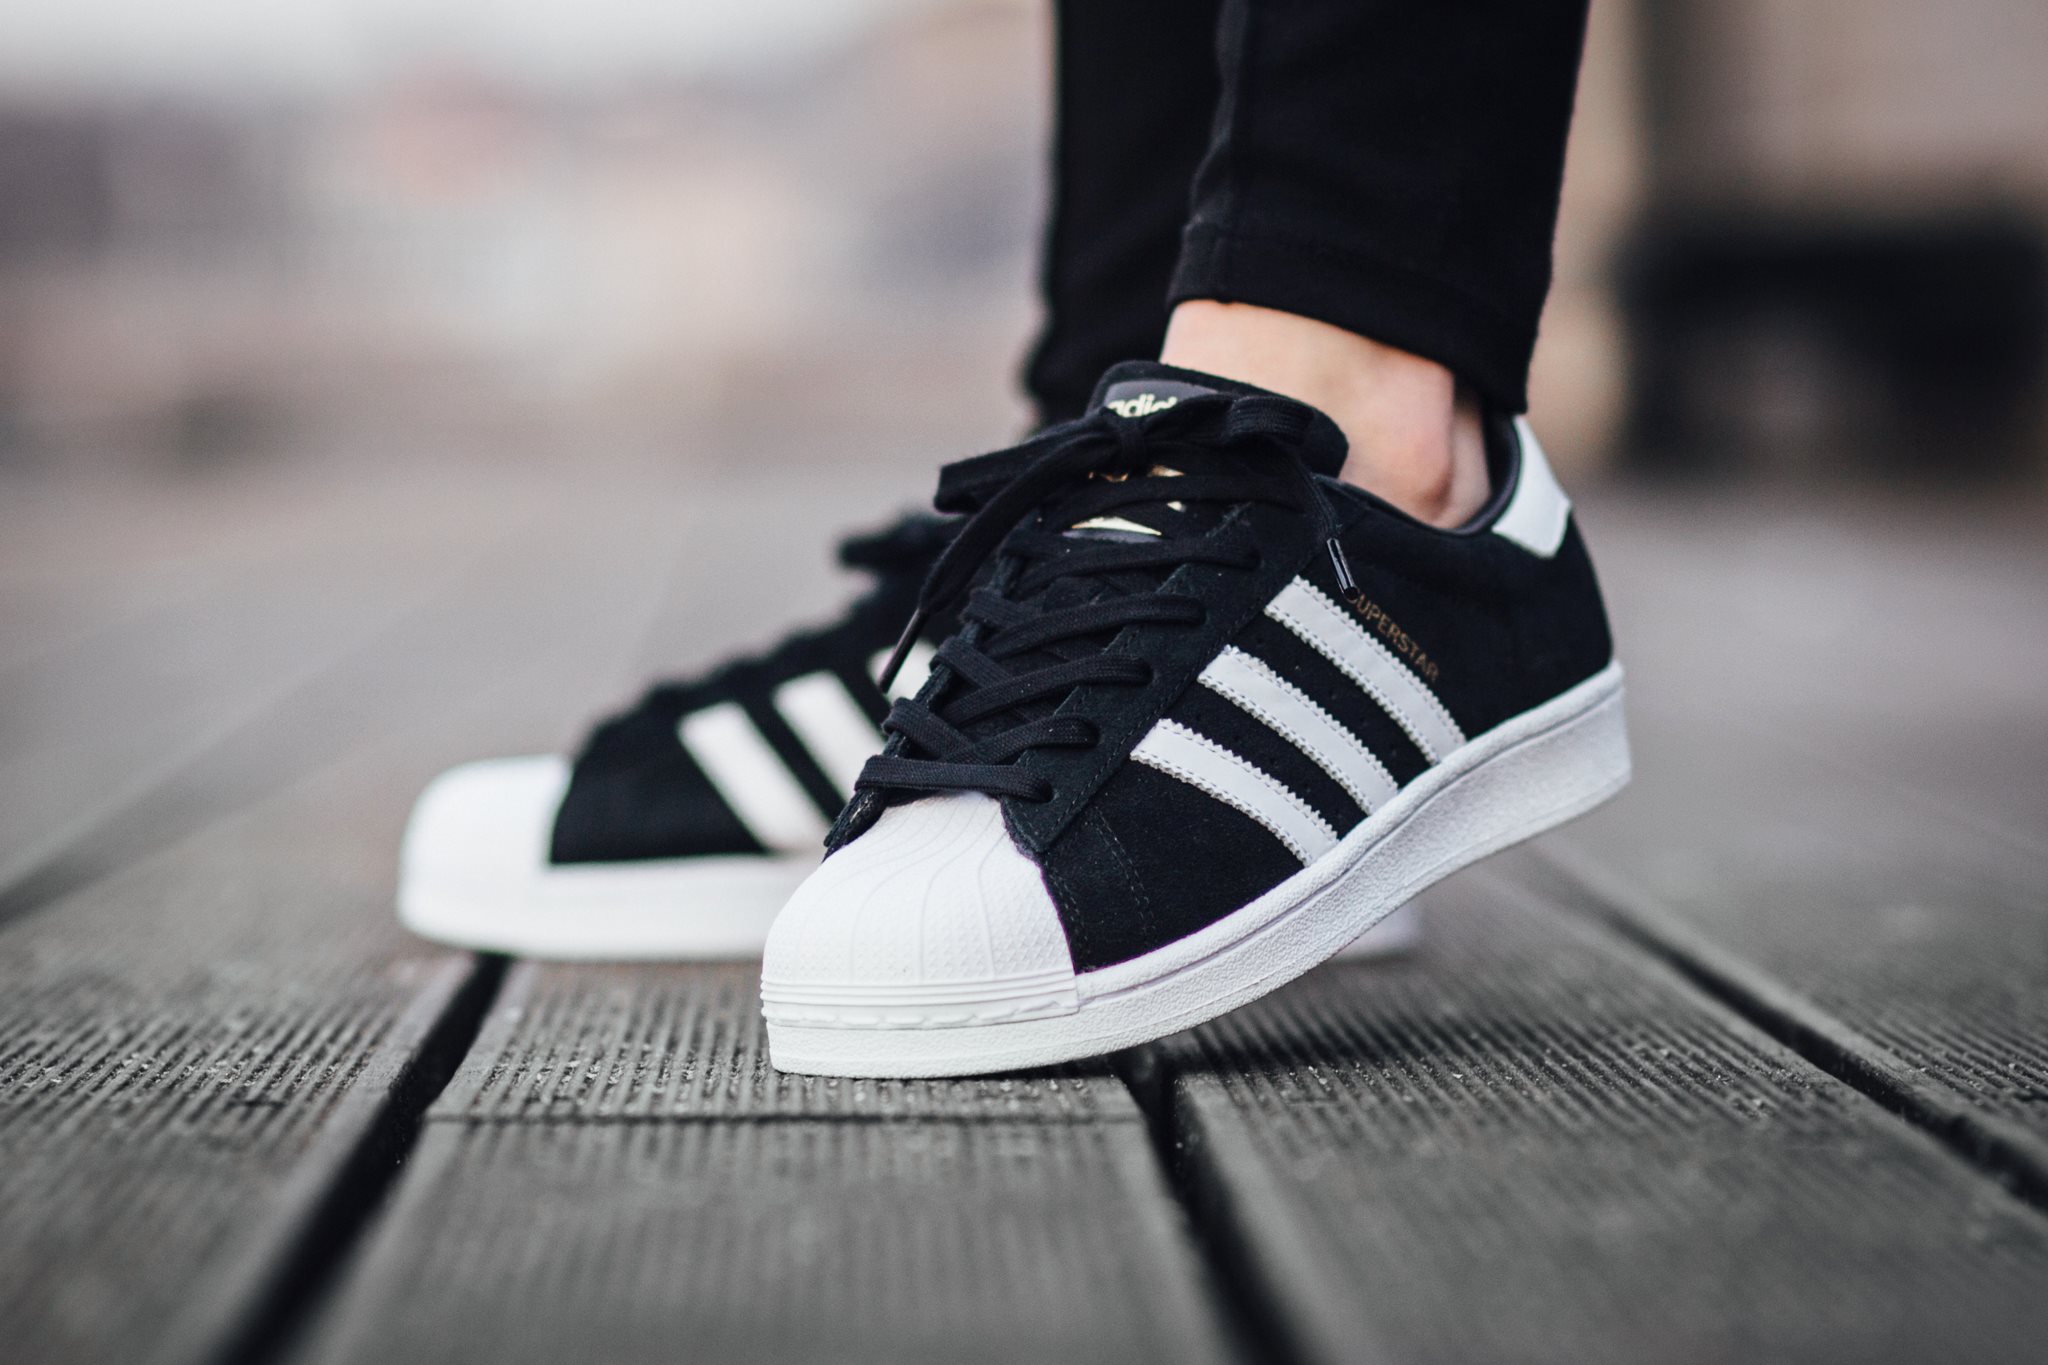 Feel Free White Black Adidas Superstar 2 Lace Shoes